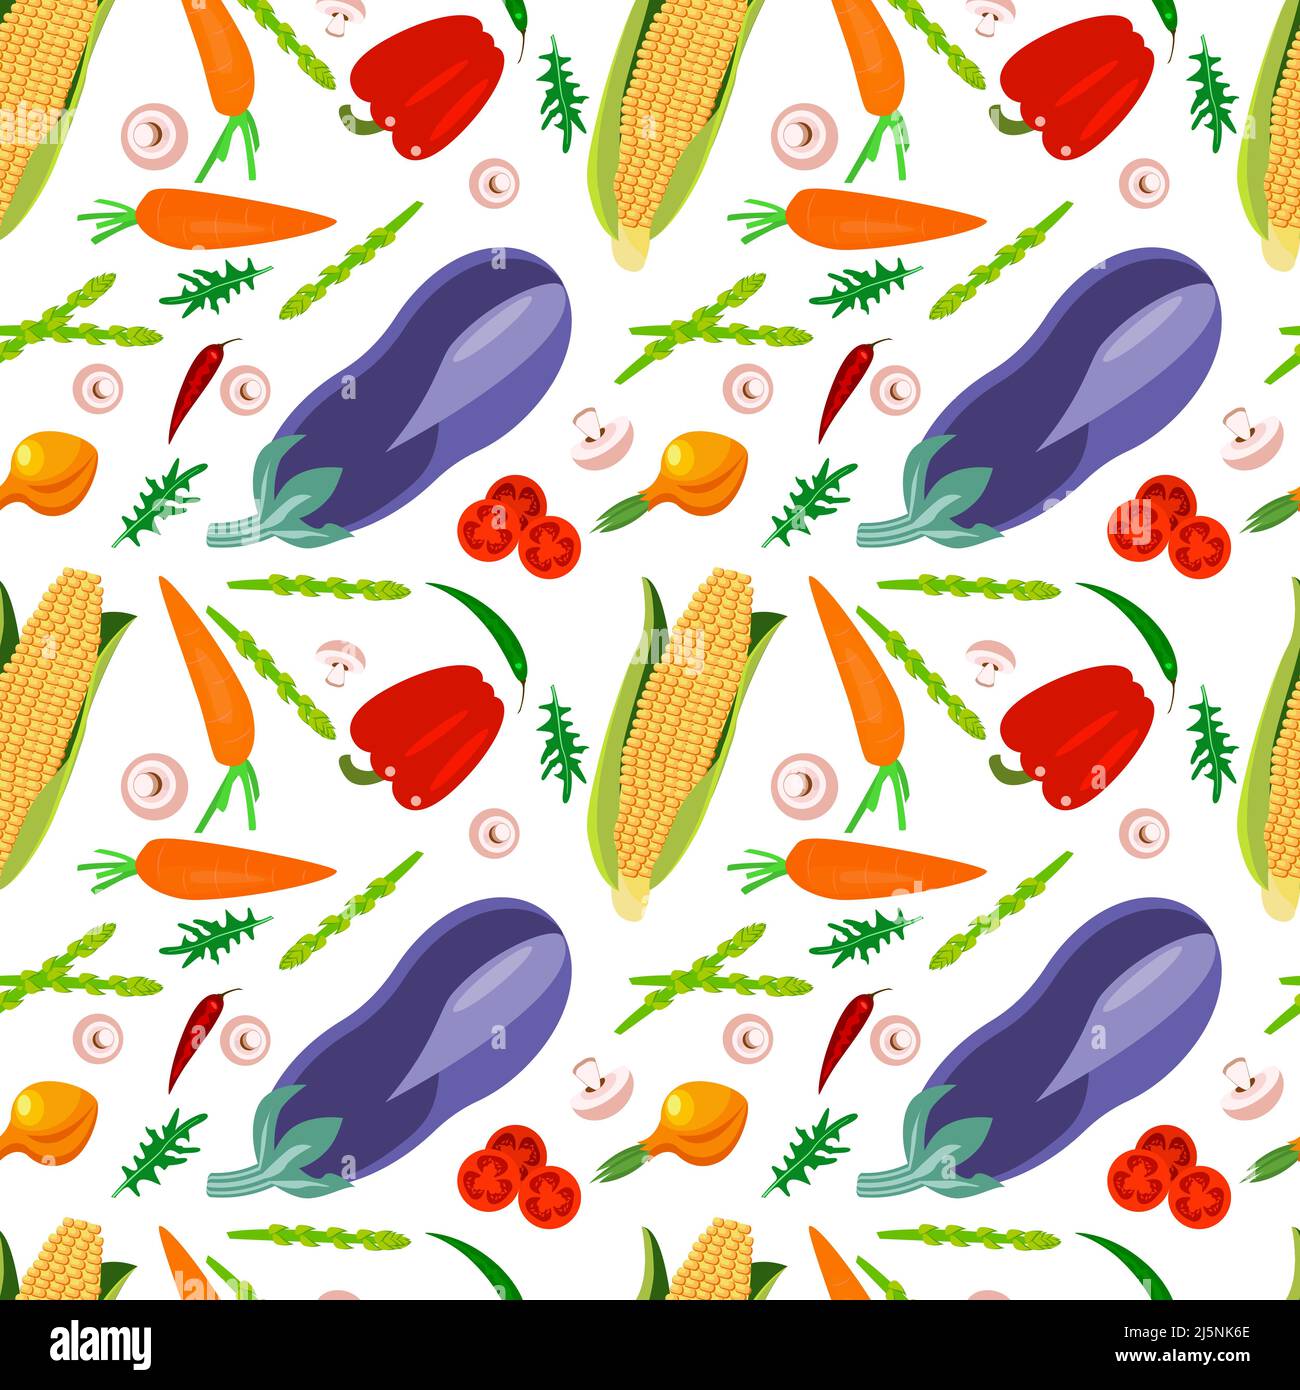 Food background and colorful vegetables seamless pattern Stock Vector